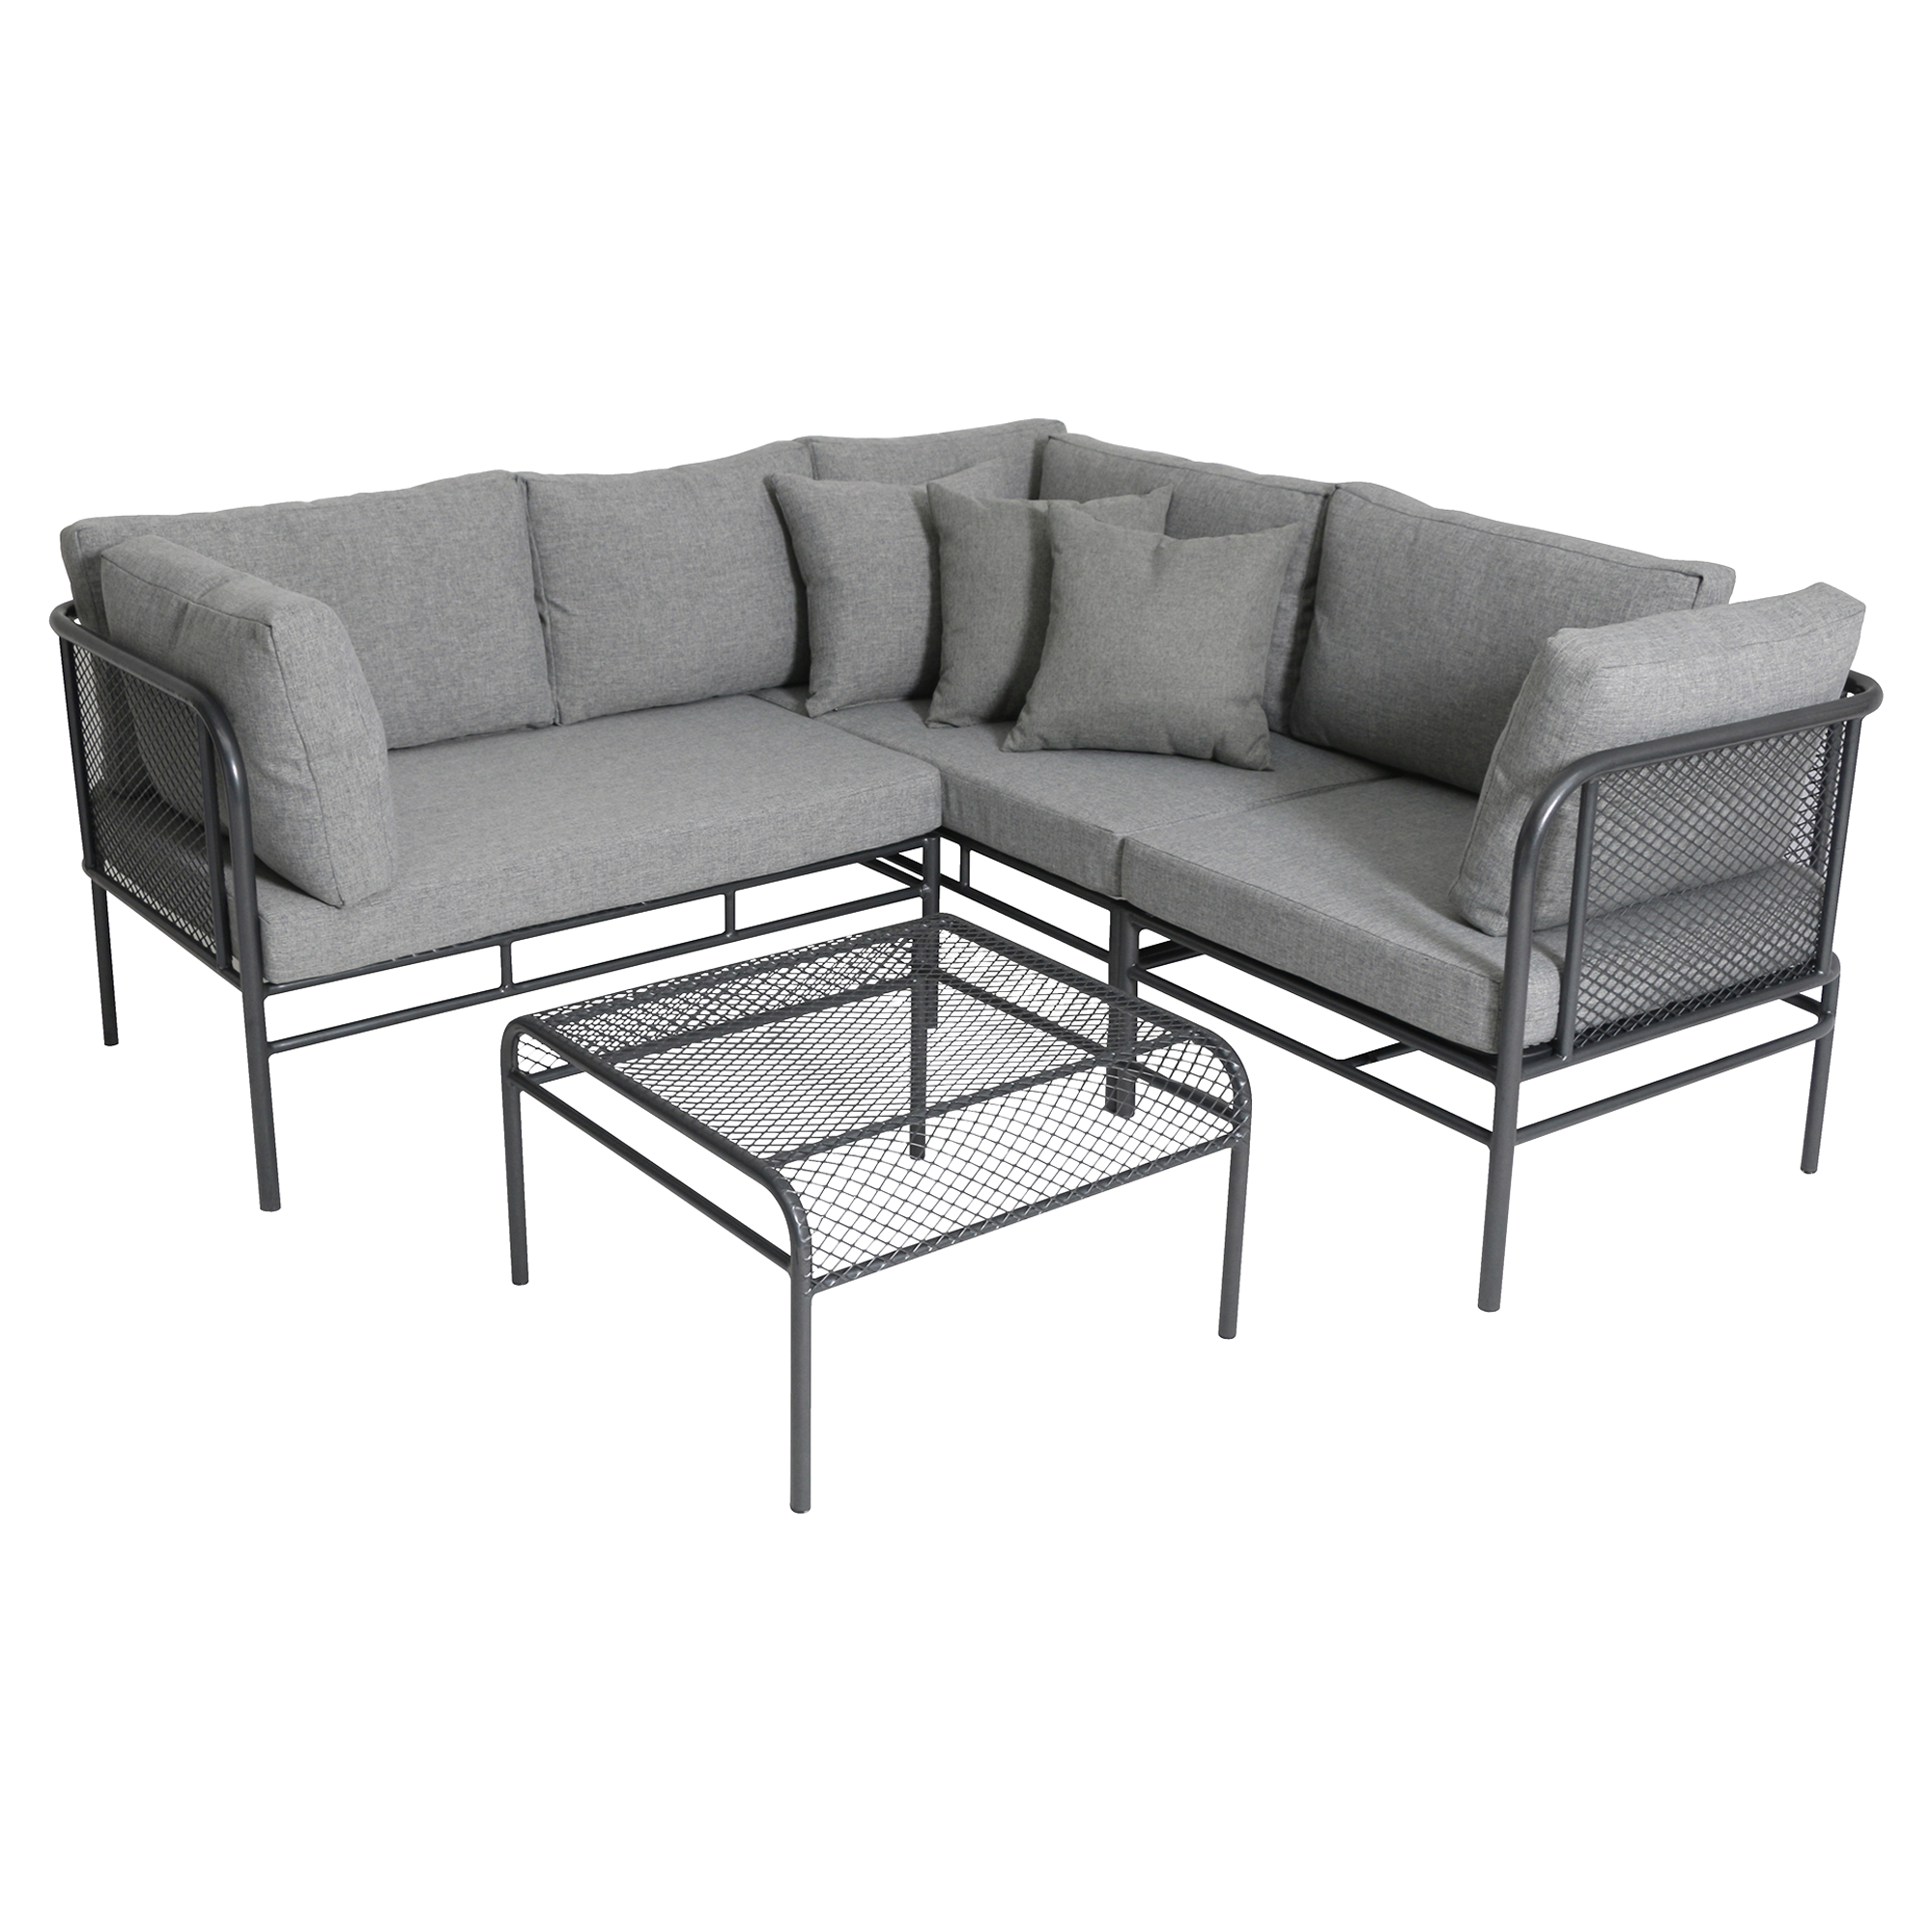 Lounge-Set 'Toulouse' Metall grau, 3-teilig + product picture